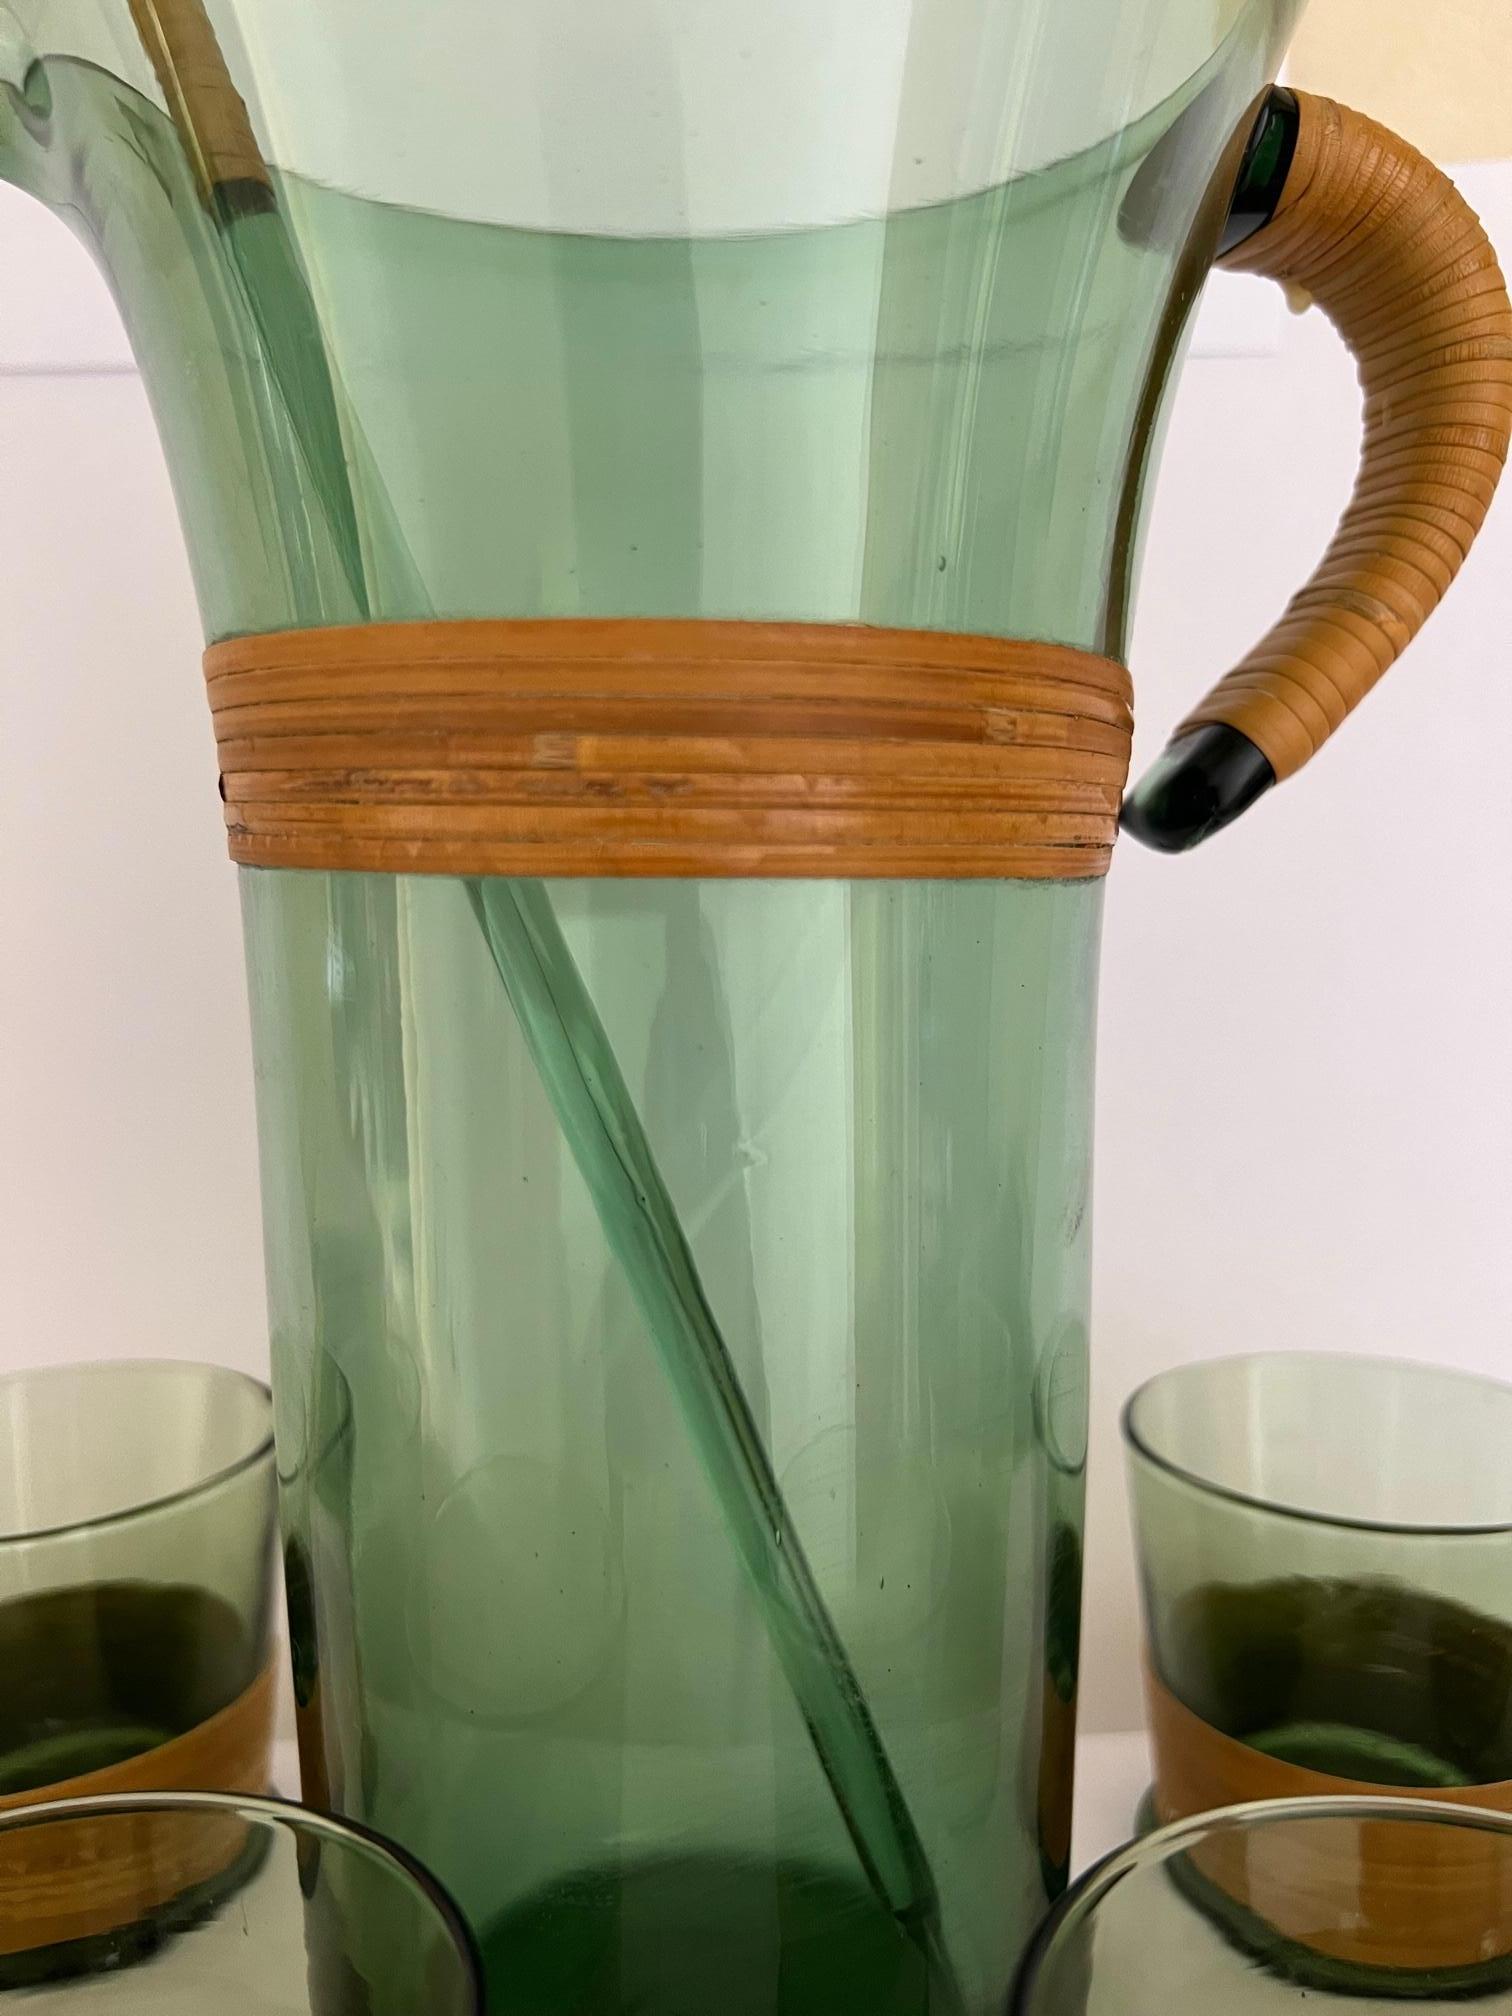 Vintage blown green glass cocktail drink set wrapped in rattan. The set includes seven pieces, a pitcher, six glasses and a stirrer stick.


Measurements:
Pitcher-9.38 tall x 7 across handle
Glasses- 2.58 tall x 2.58 wide at mouth
Stirrer-